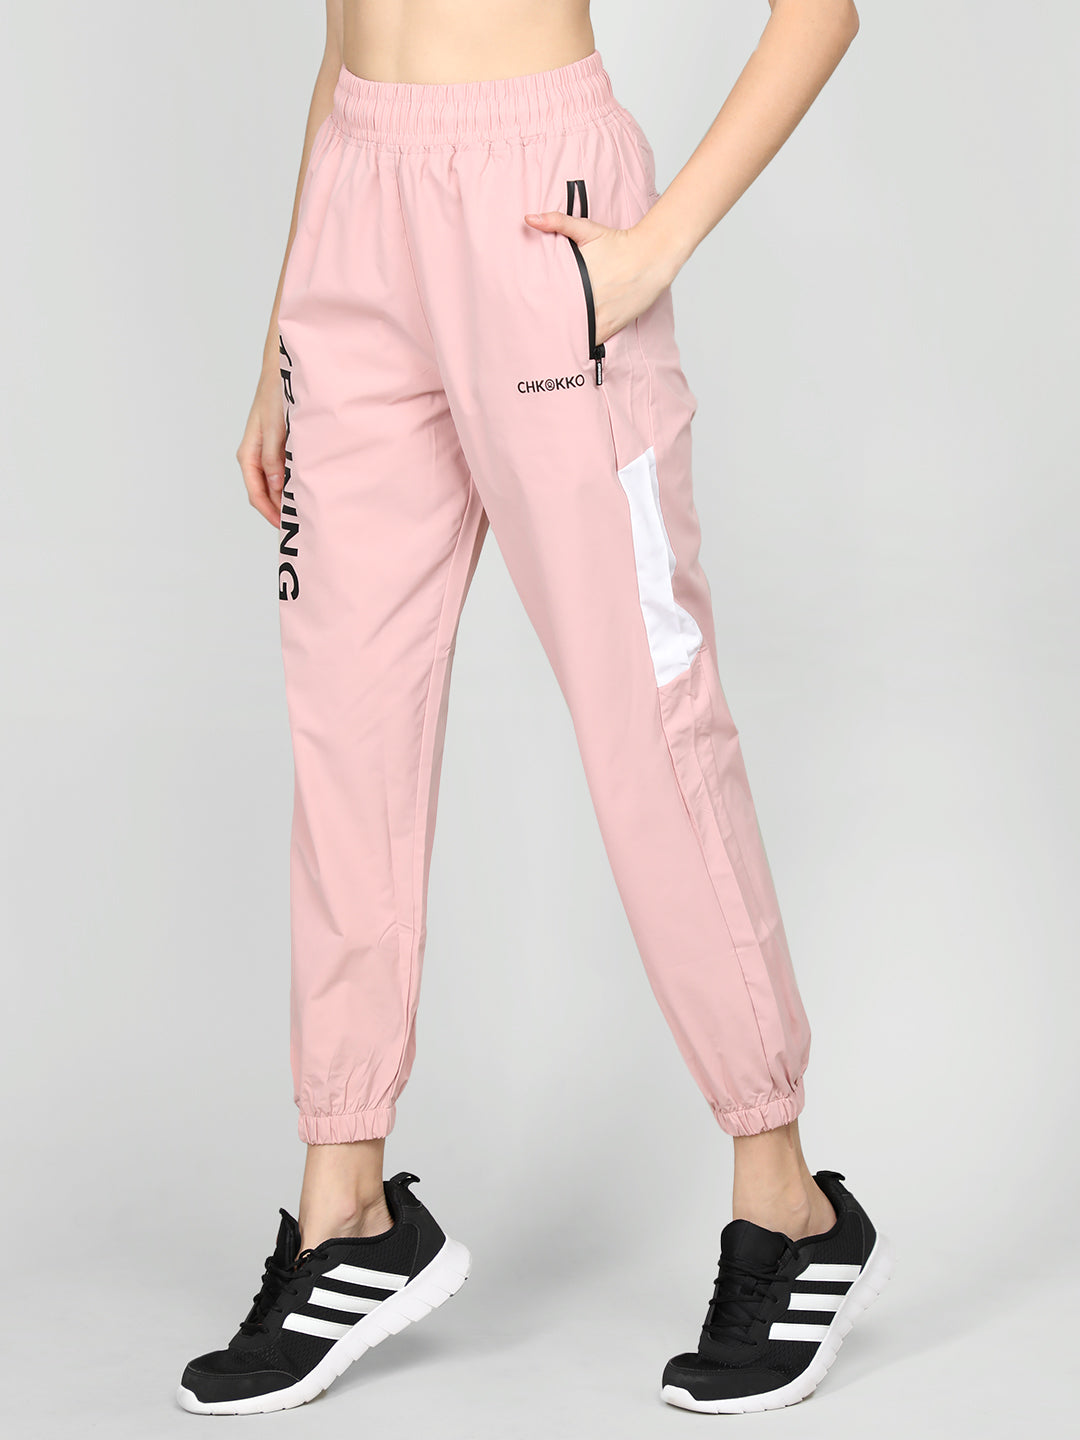 A23 Women's Cotton Basic Lower 104 – Online Shopping site in India